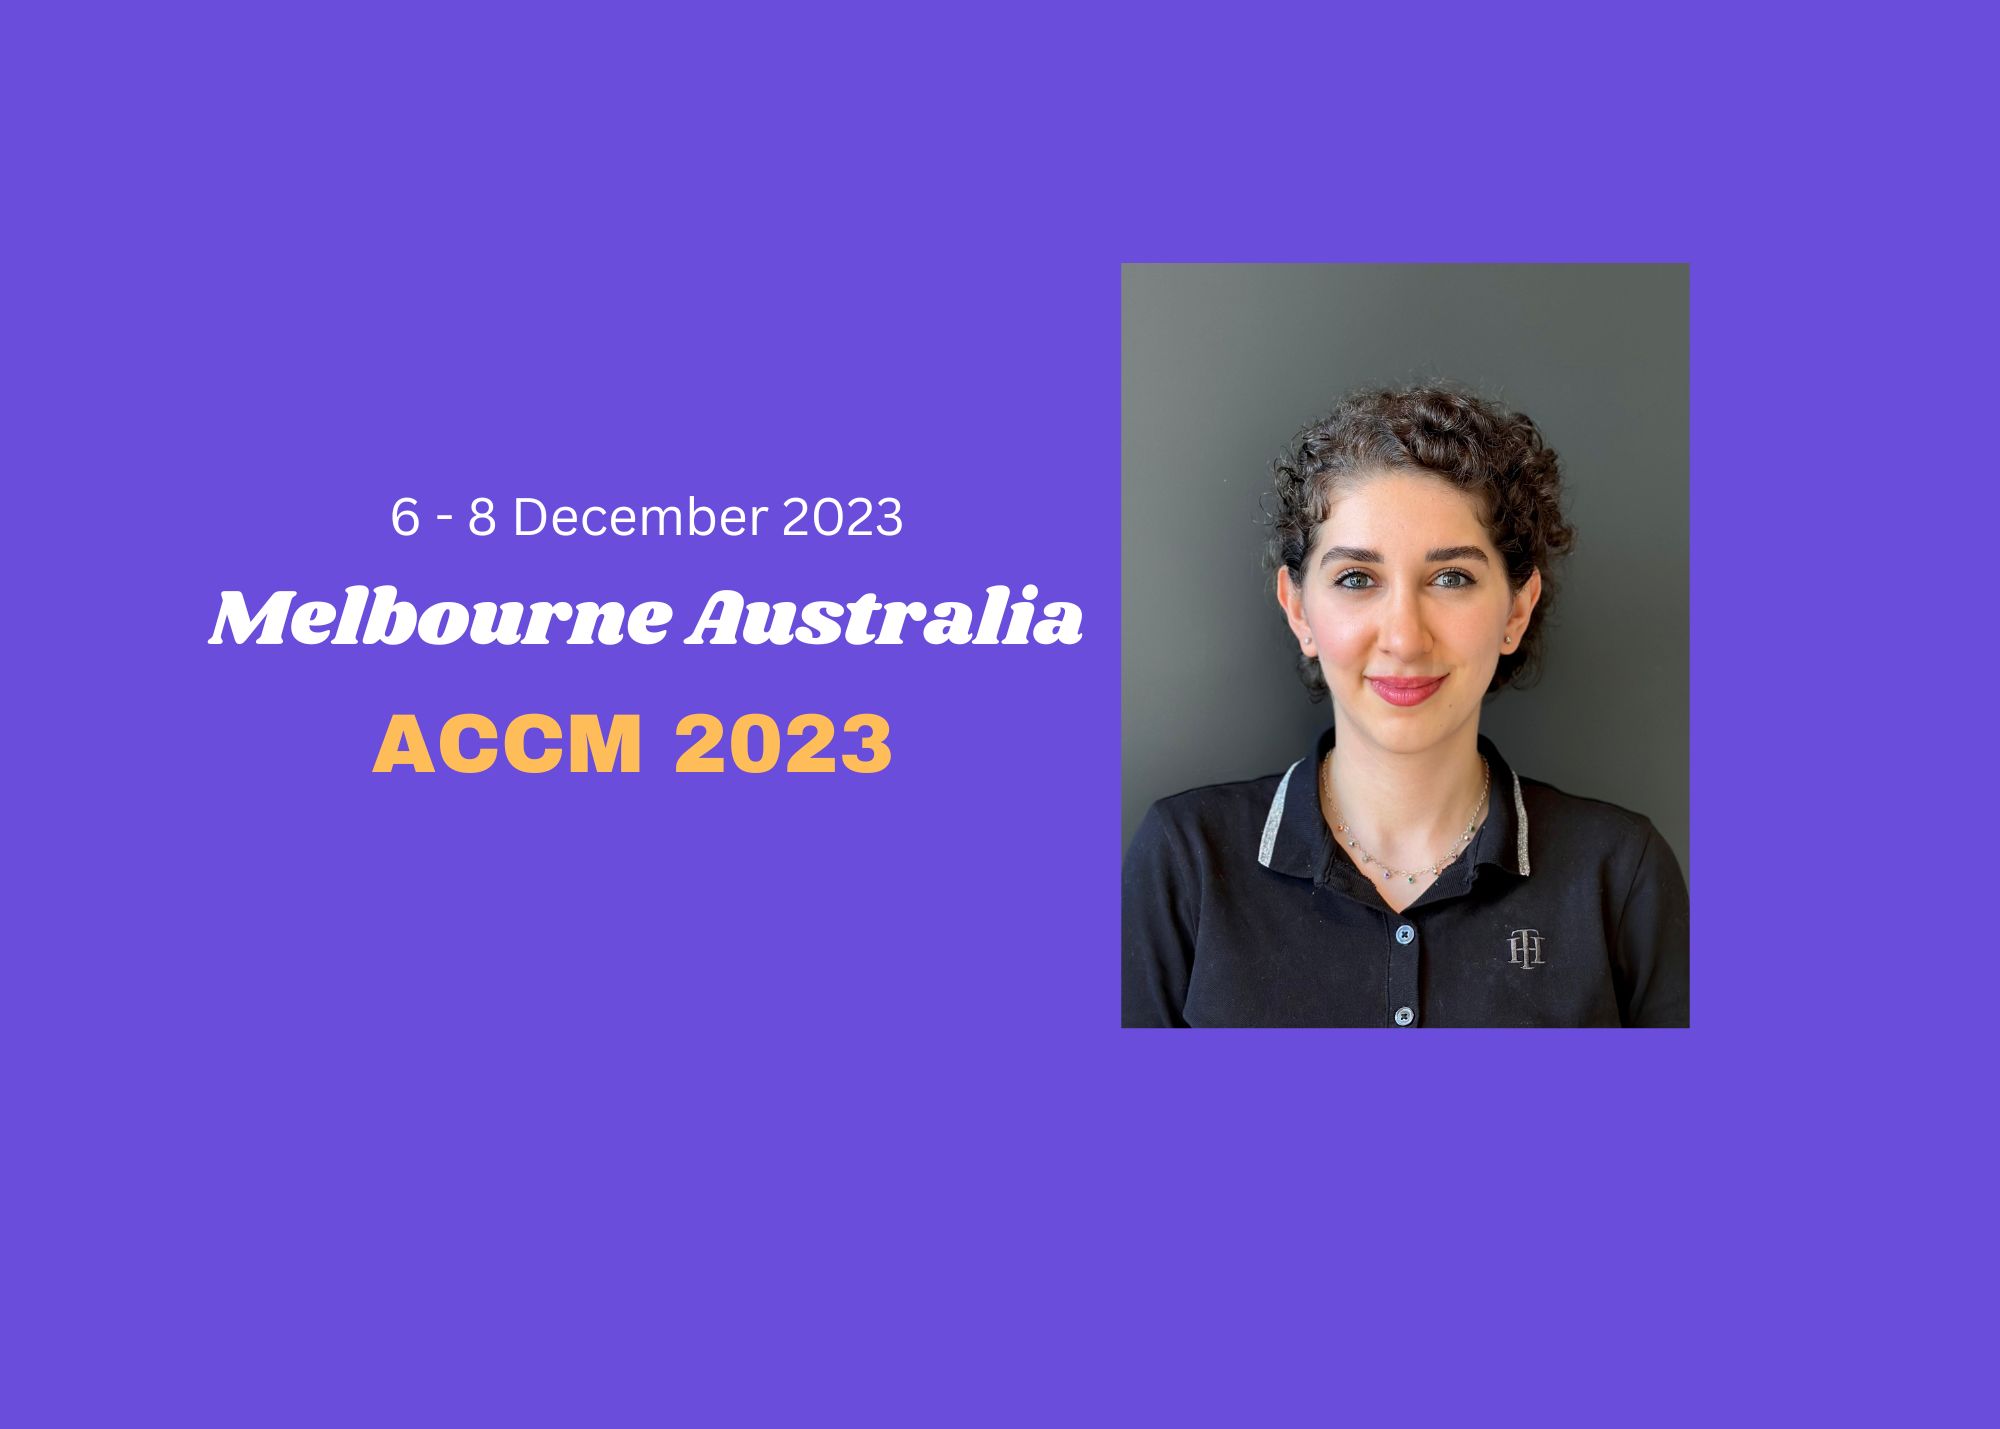 UNSW RIIS Student Sana Shahoveisi was awarded the Steven Prize ACCM 2023